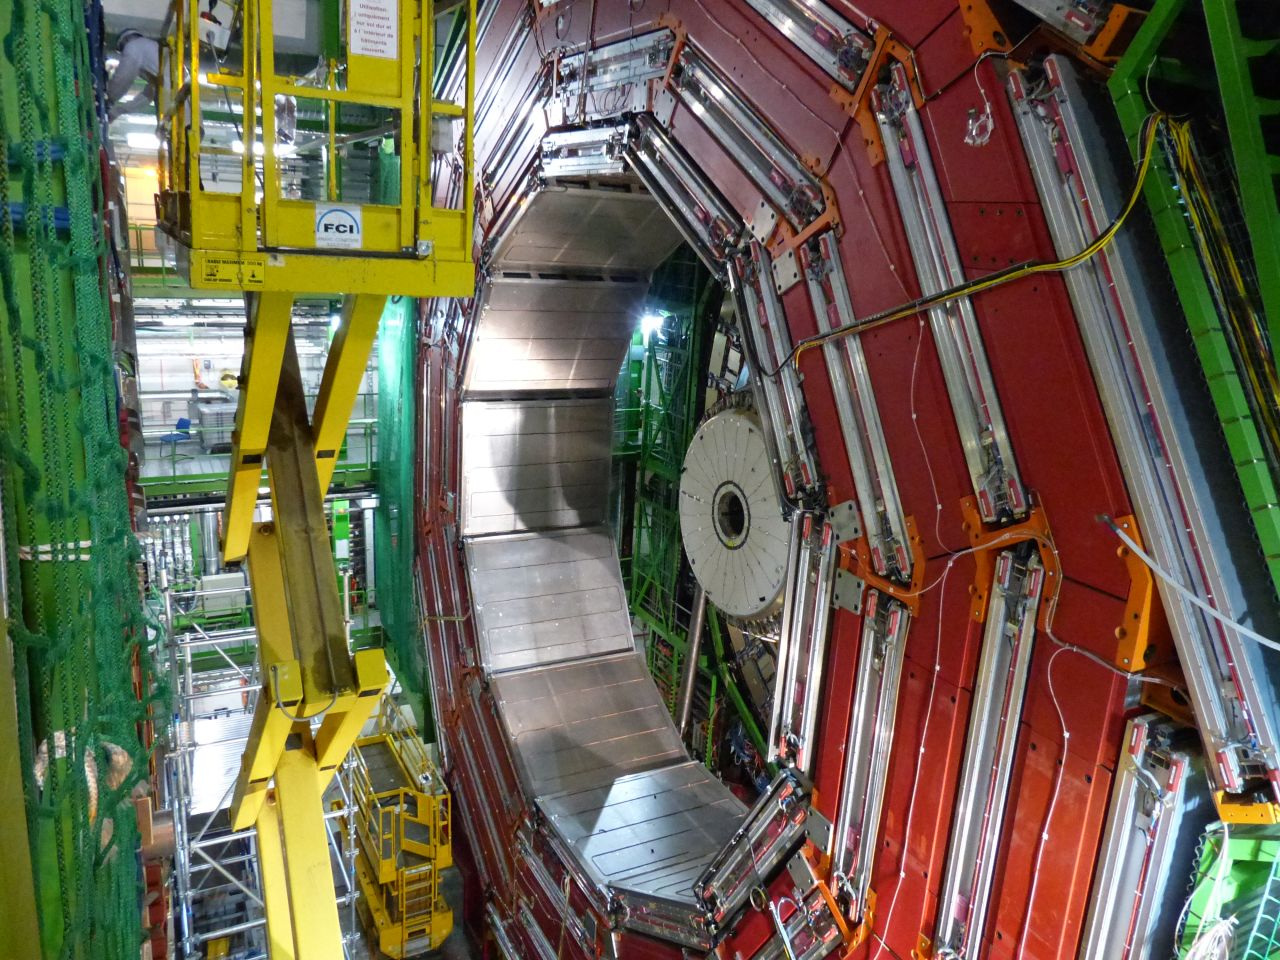 The Higgs boson, the elusive particle that scientists had hoped to find for decades, helps explain why matter has mass. This is part of CMS, one one of the experiments that detected the particle.